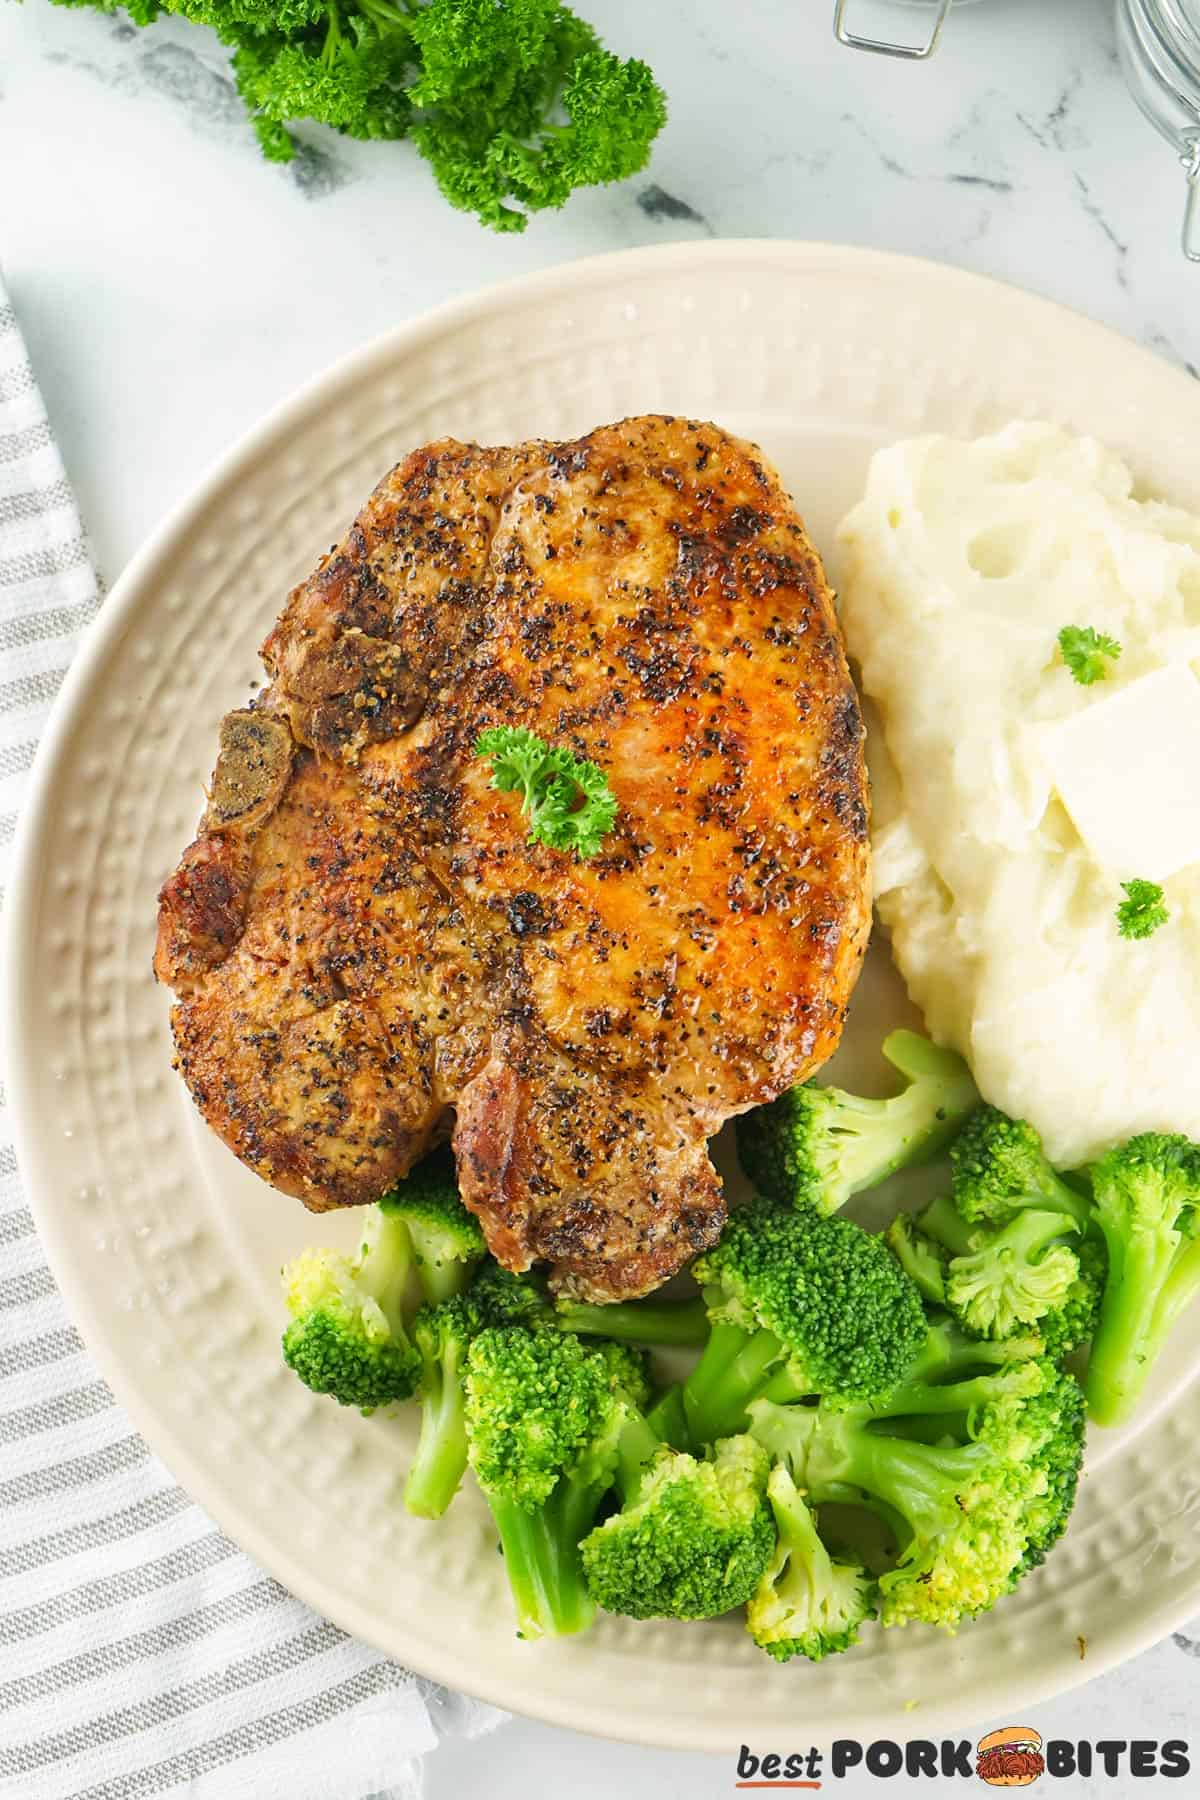 grilled pork chop on a plate with broccoli and mashed potatoes